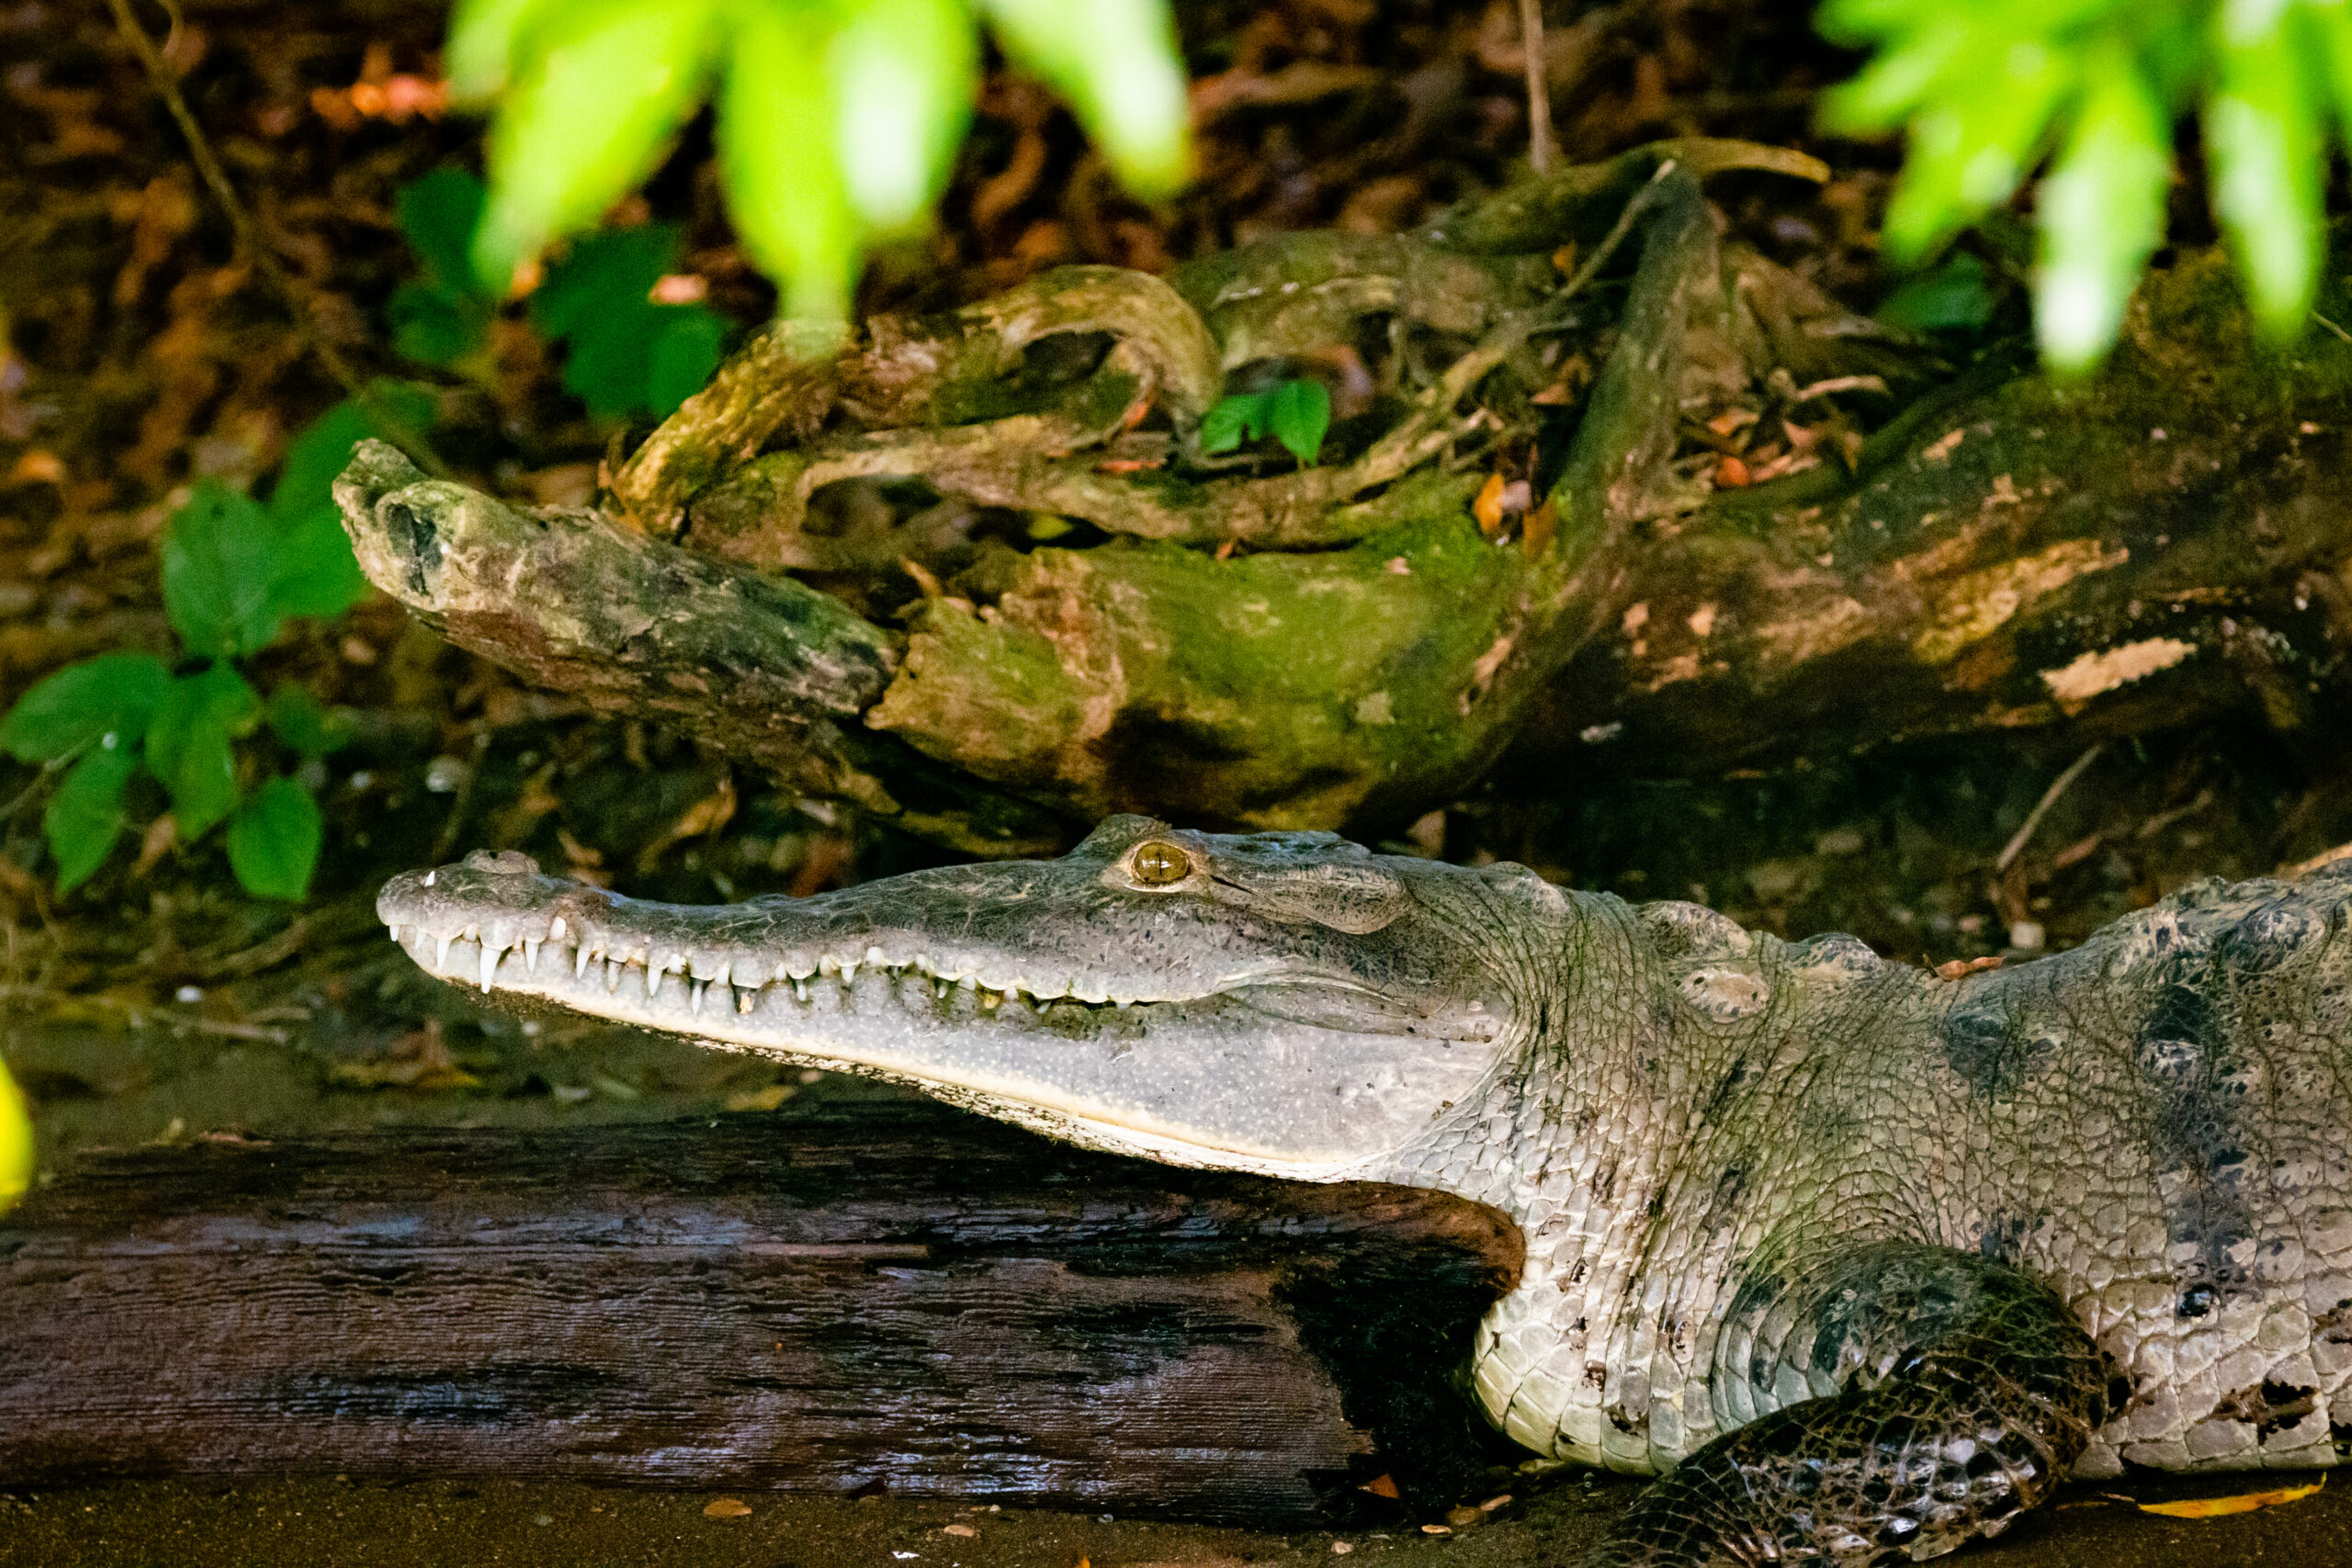 Photo of crocodile in Panama Canal from Panama travel stock photography website